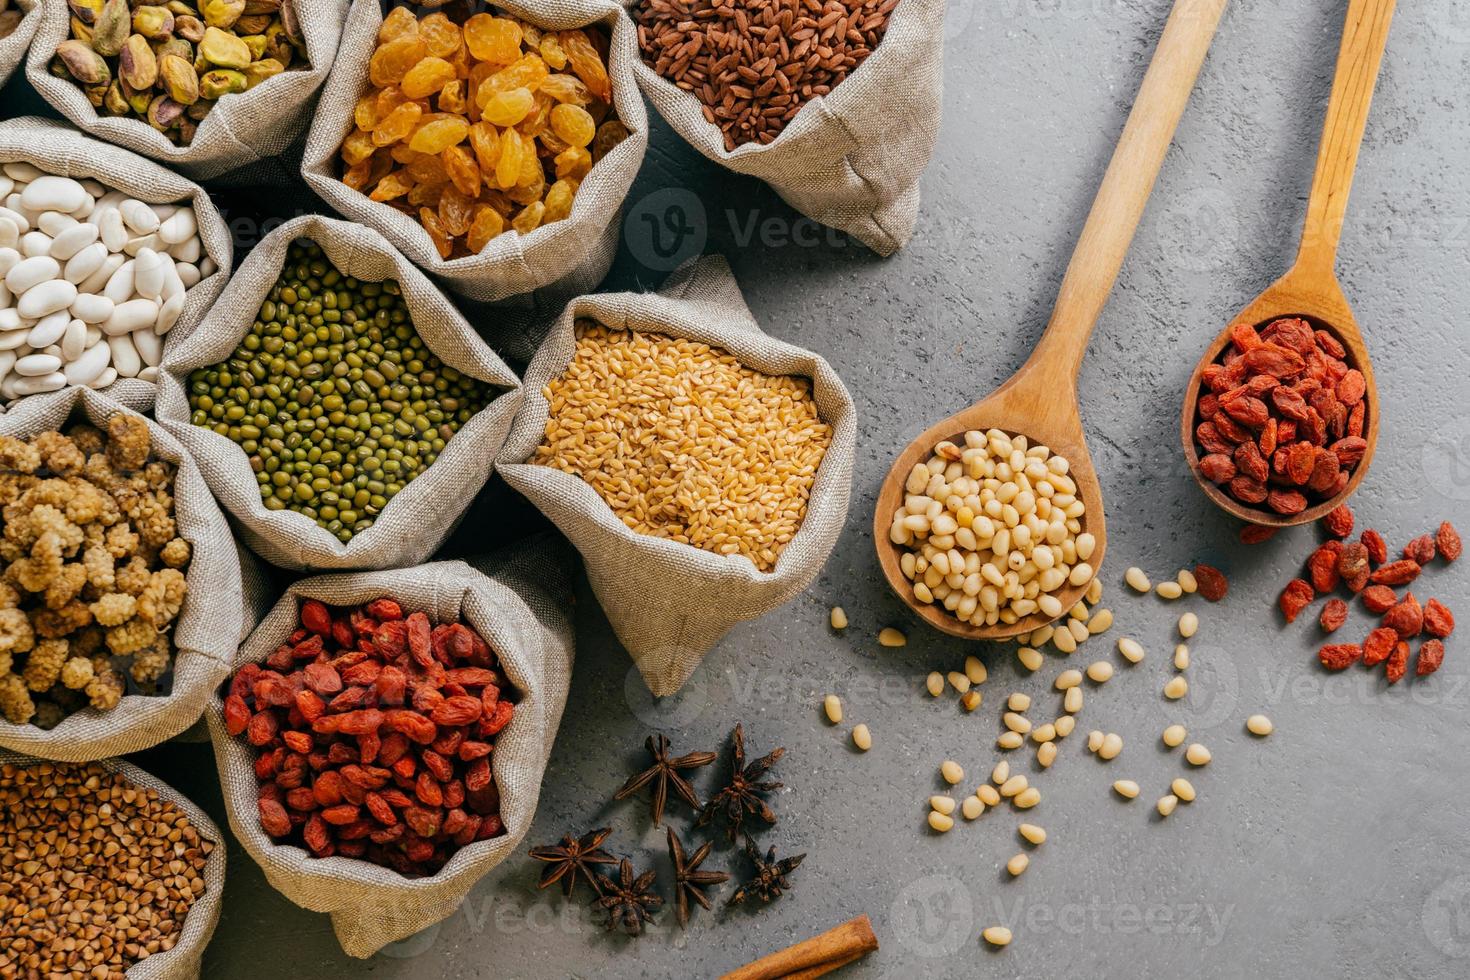 Husbandry and nutrtion concept. Top view of various beans and colorful dried fruit packed in little burlap sacks. Wooden spoon with ingredients photo